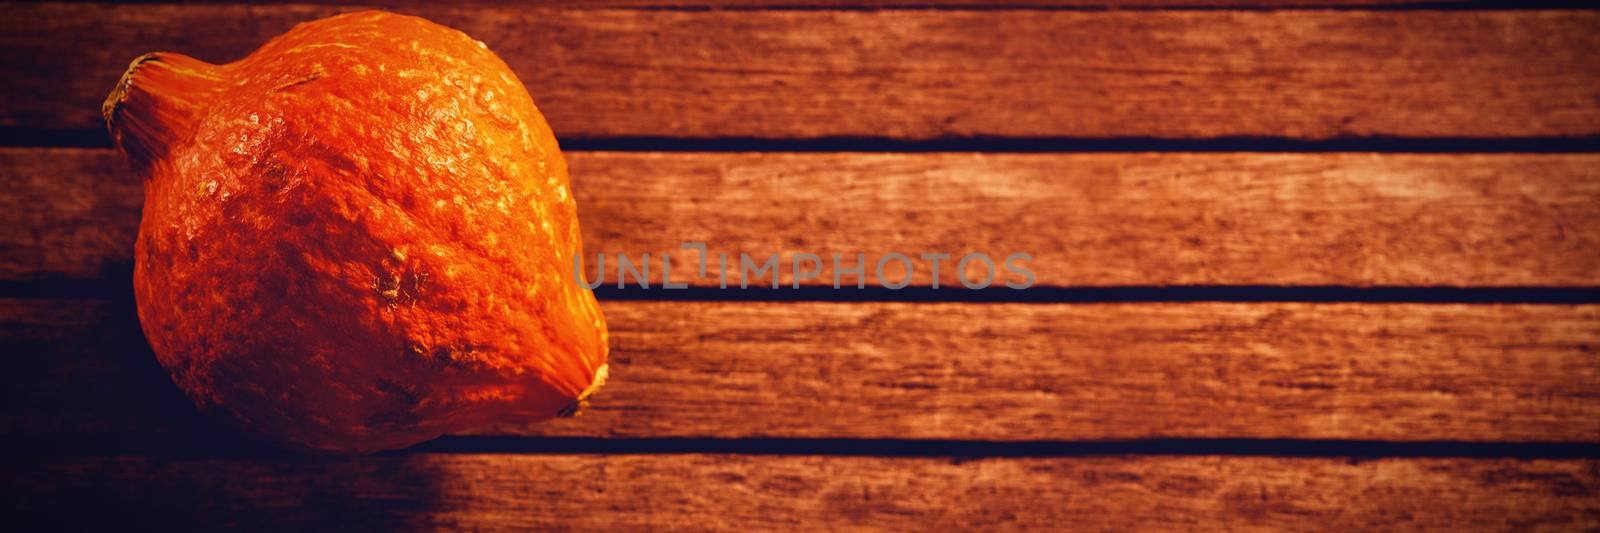 Squash on wooden table during Halloween by Wavebreakmedia